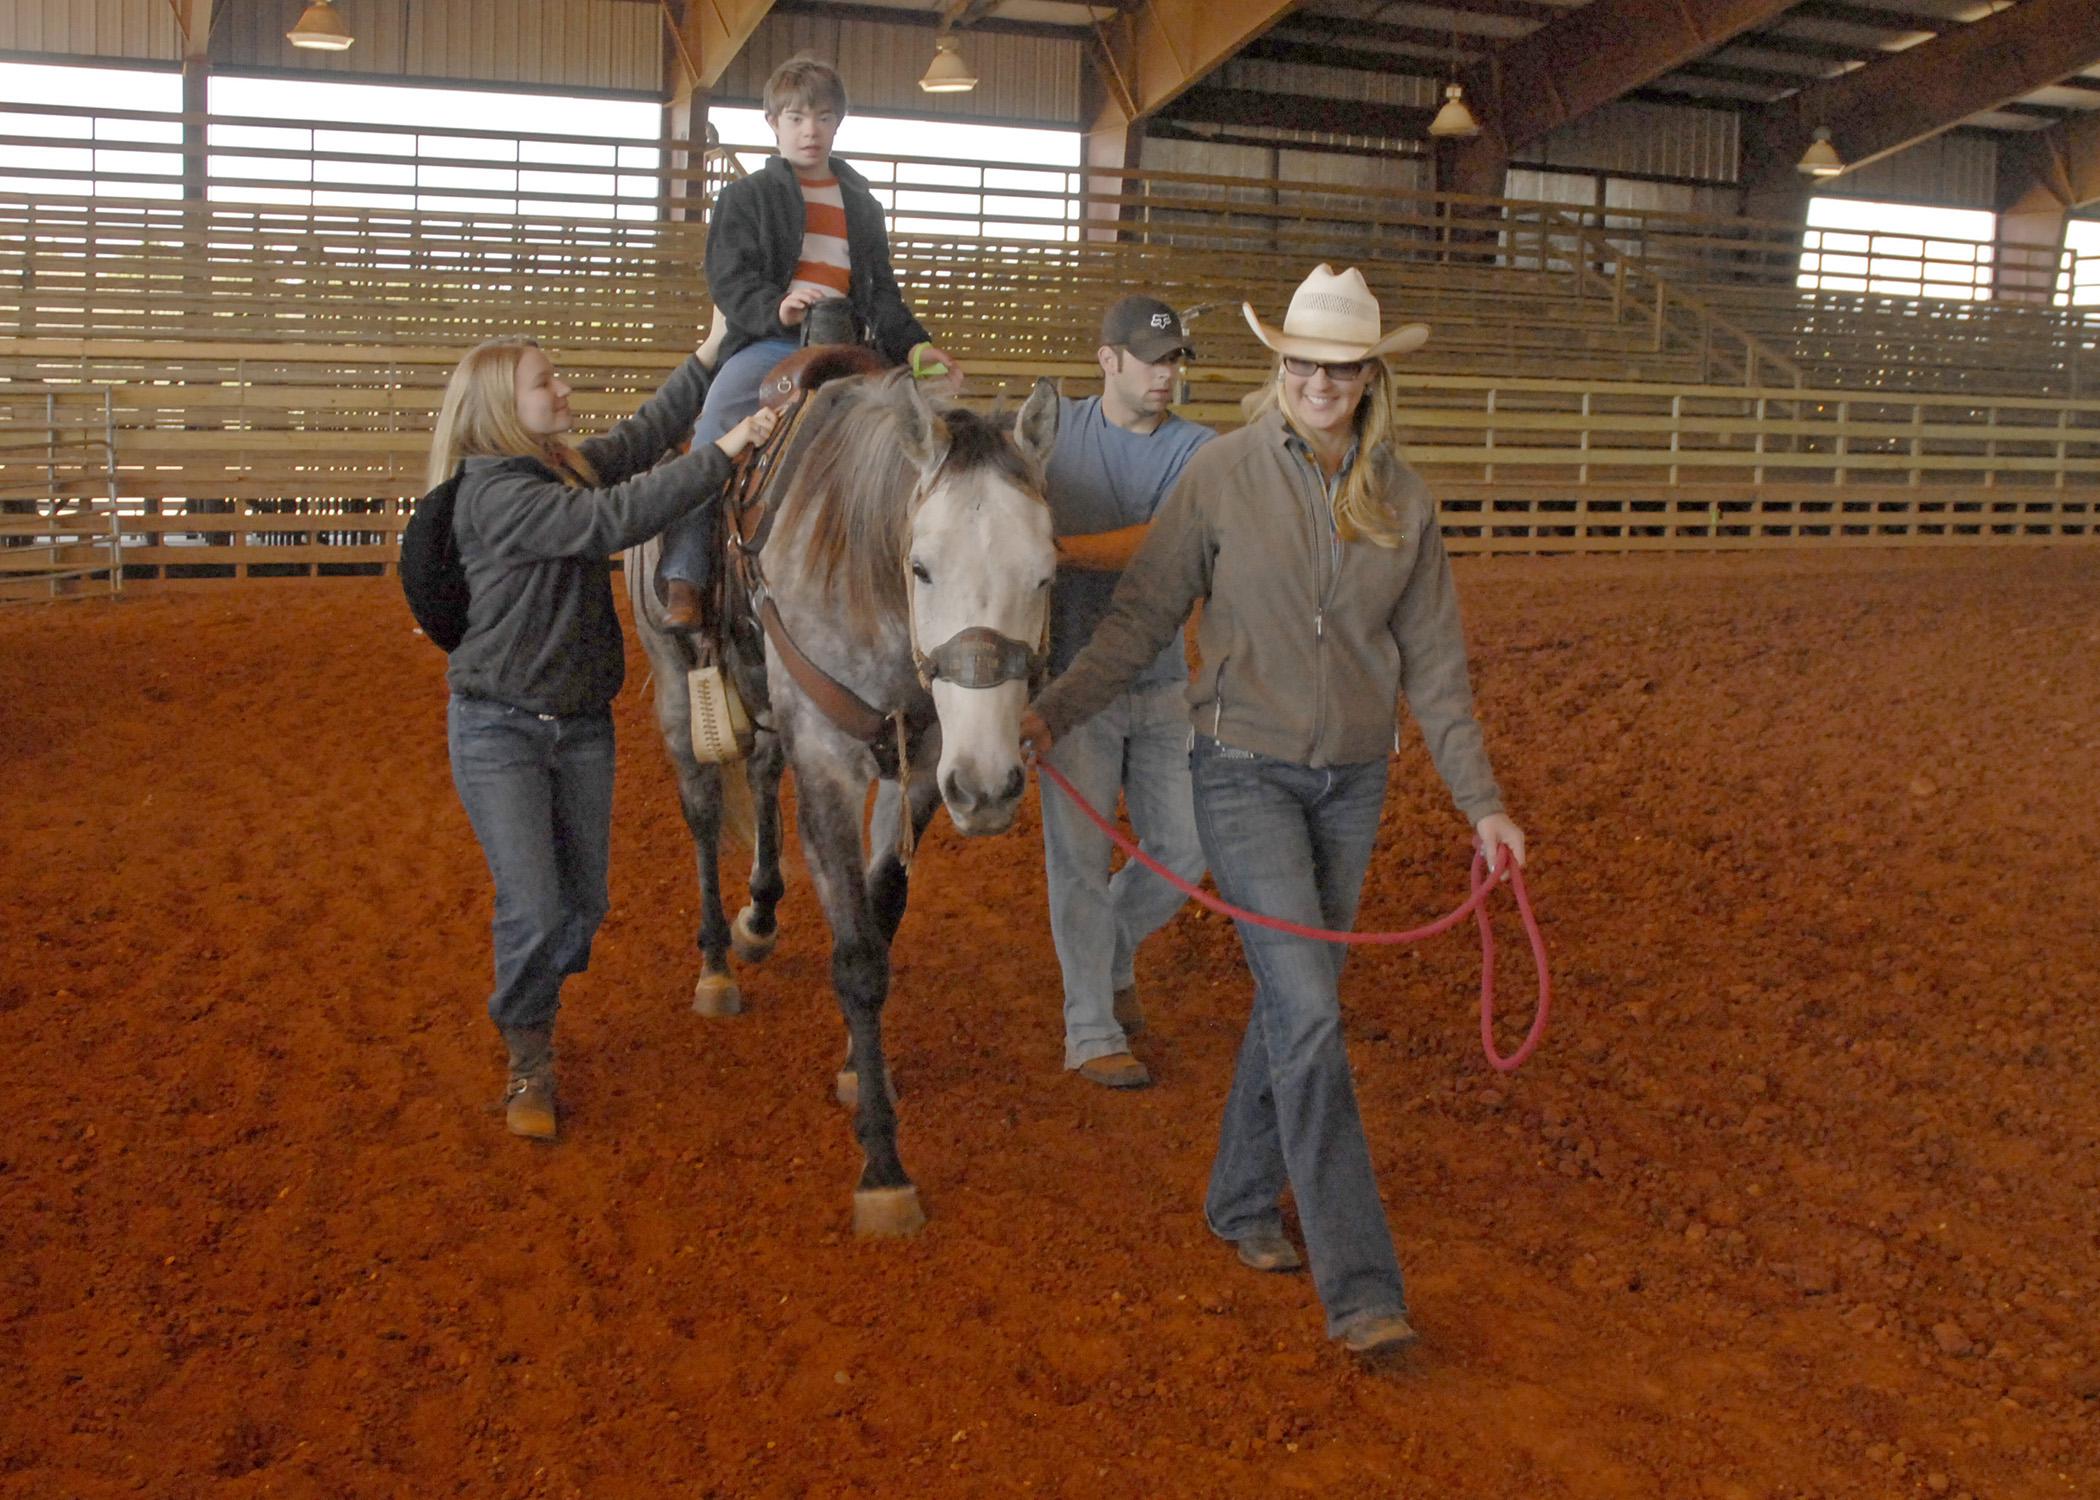 Garrett Sullivan, 10, of Laurel, enjoys a ride on Reno at the Lamar County Fairgrounds in Purvis. Turners and Burners 4-H Club volunteer leader Lona Booth, leading the horse, is assisted by side-walkers Kaitlyn Barber and Ross Mills during the Sweetheart Rodeo on March 16, 2013. (Photo by MSU Ag Communications/Linda Breazeale)